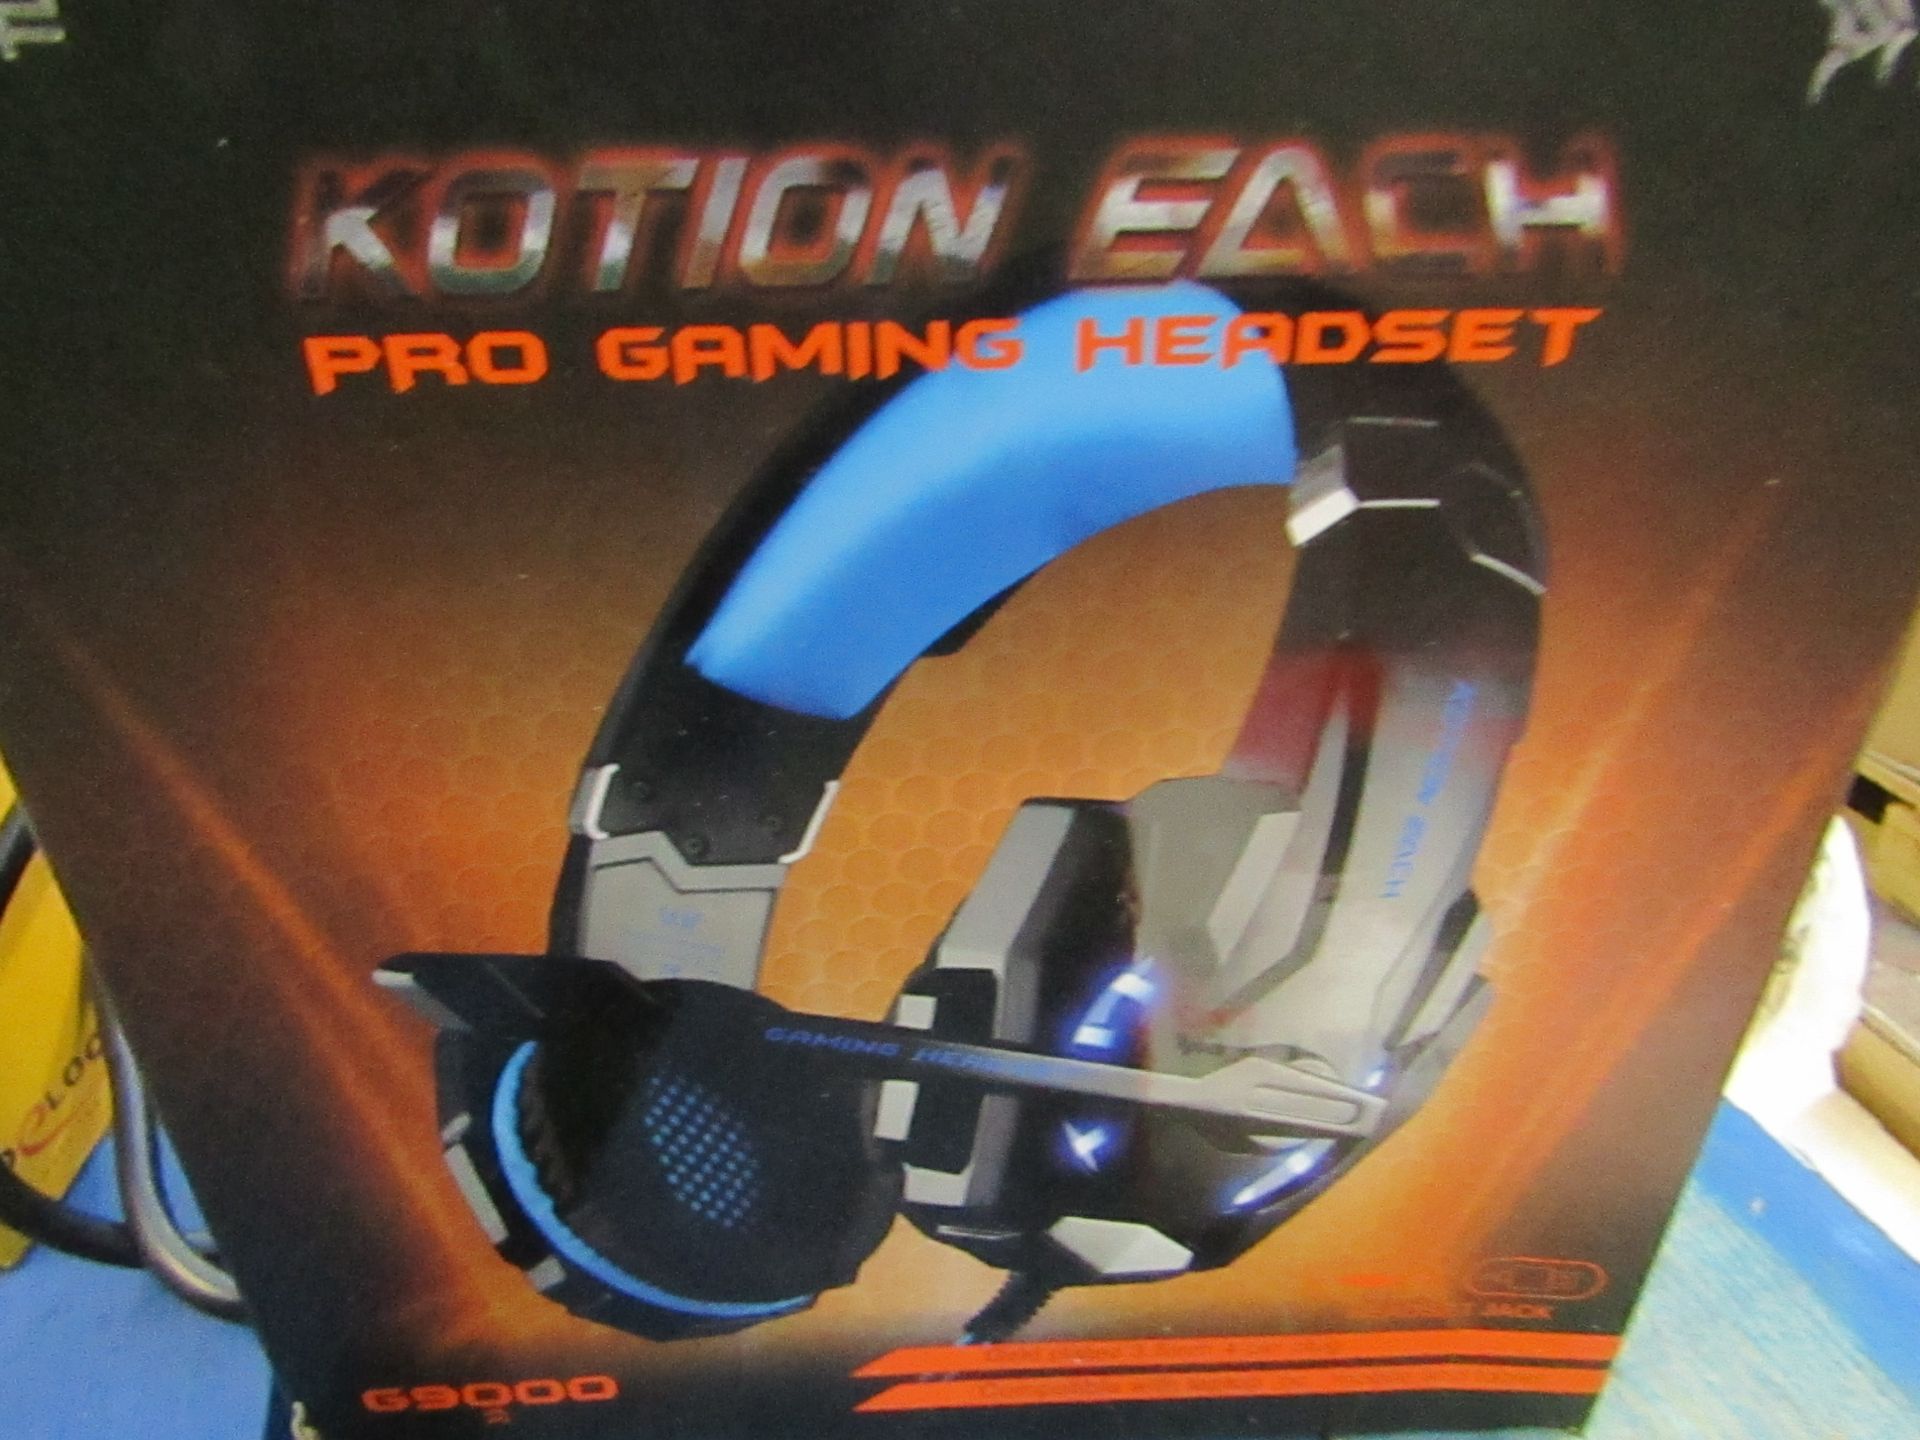 Kotion each Pro Gaming heasd set, tested working for sound to the ear phines, boxed